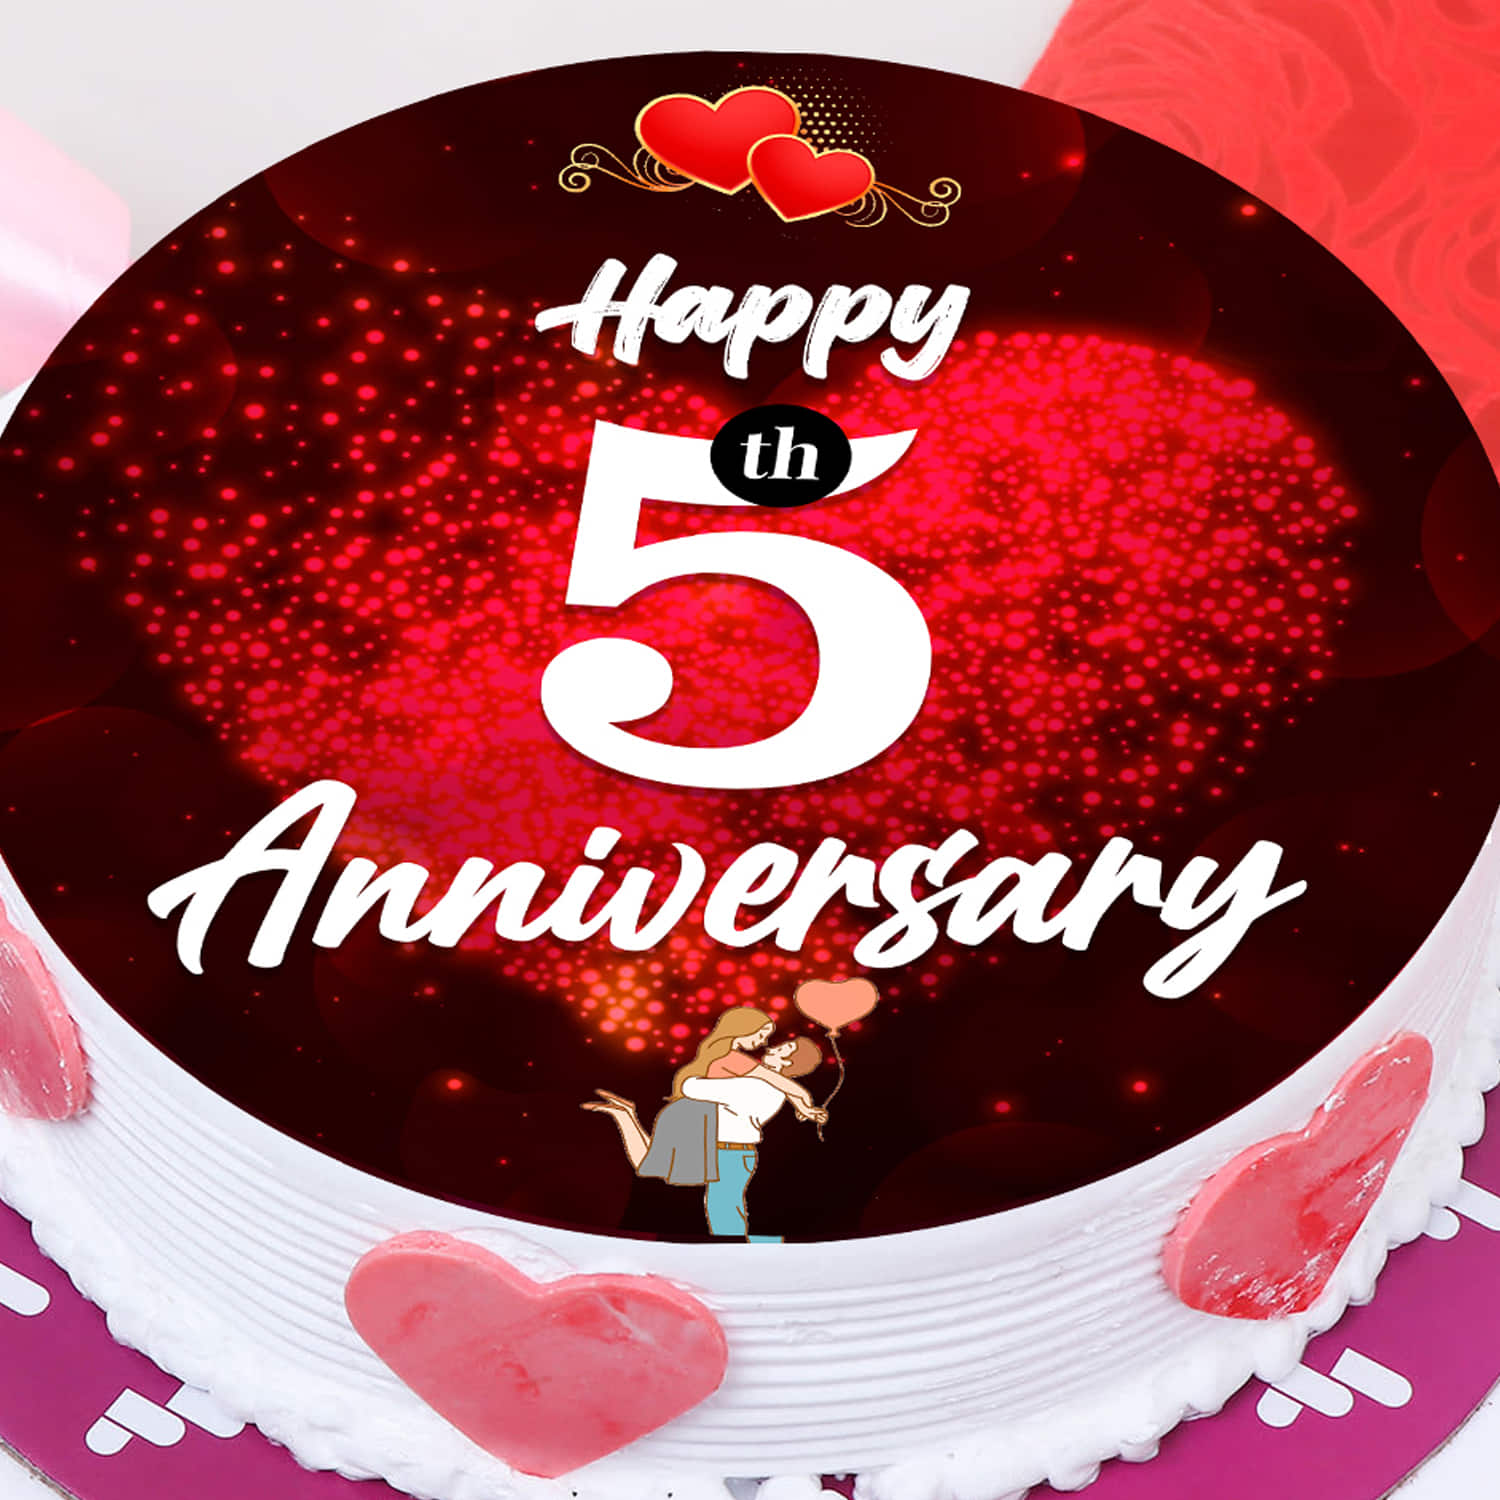 Wedding Anniversary Cake Quotes to Celebrate Another Year of Love, Happiness  & Togetherness